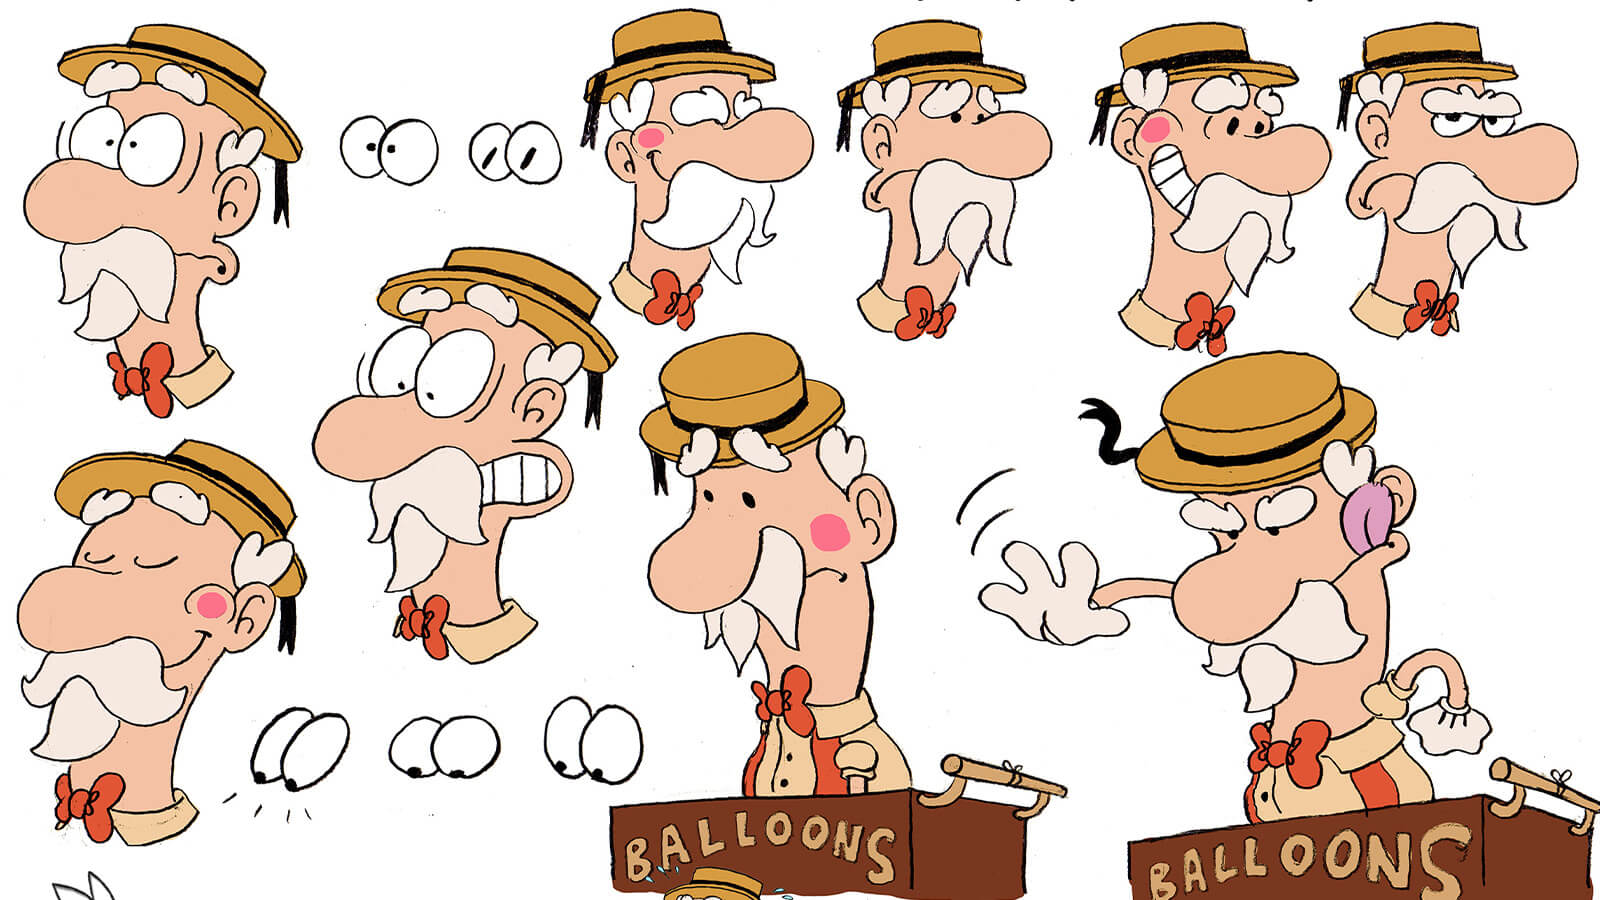 Concept artwork of the old carnival balloonman with different facial expressions